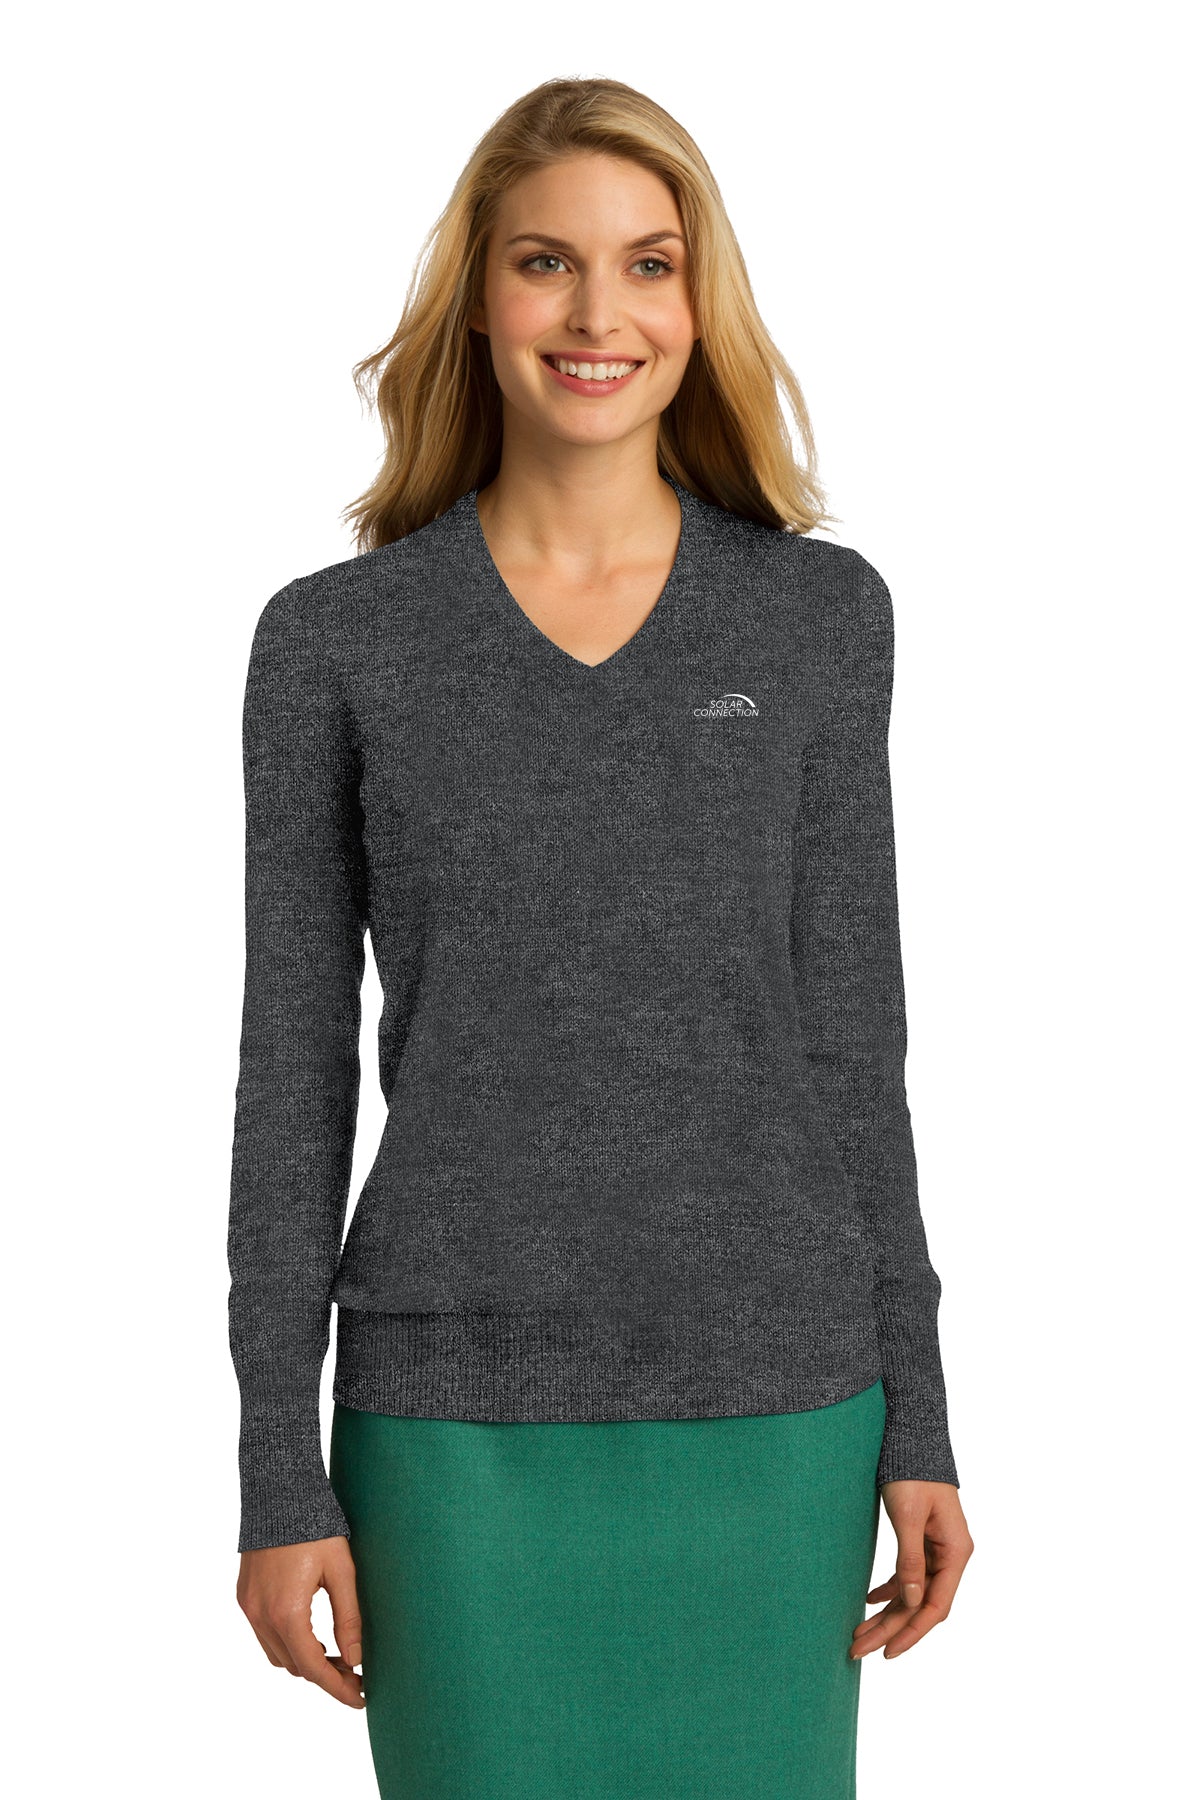 Solar Connection Ladies V-Neck Sweater